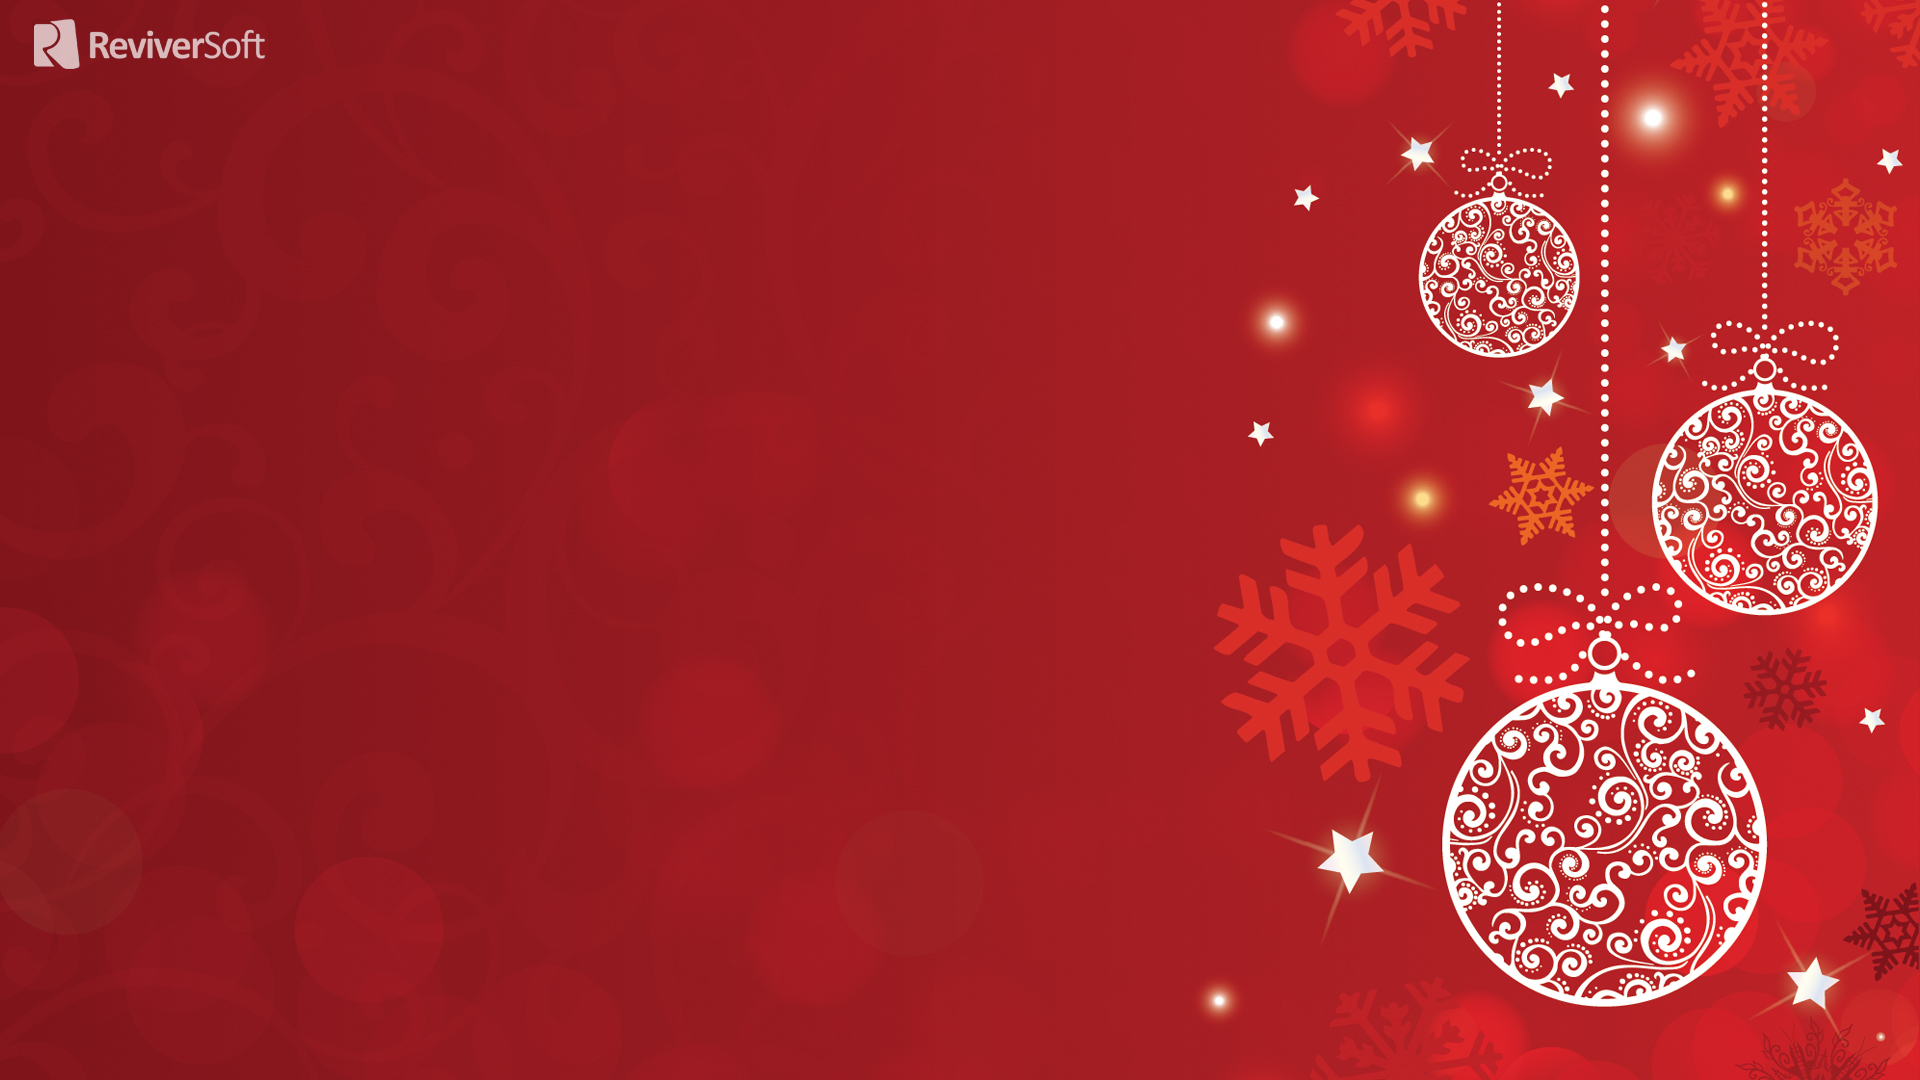 White Christmas Backgrounds Download: white christmas